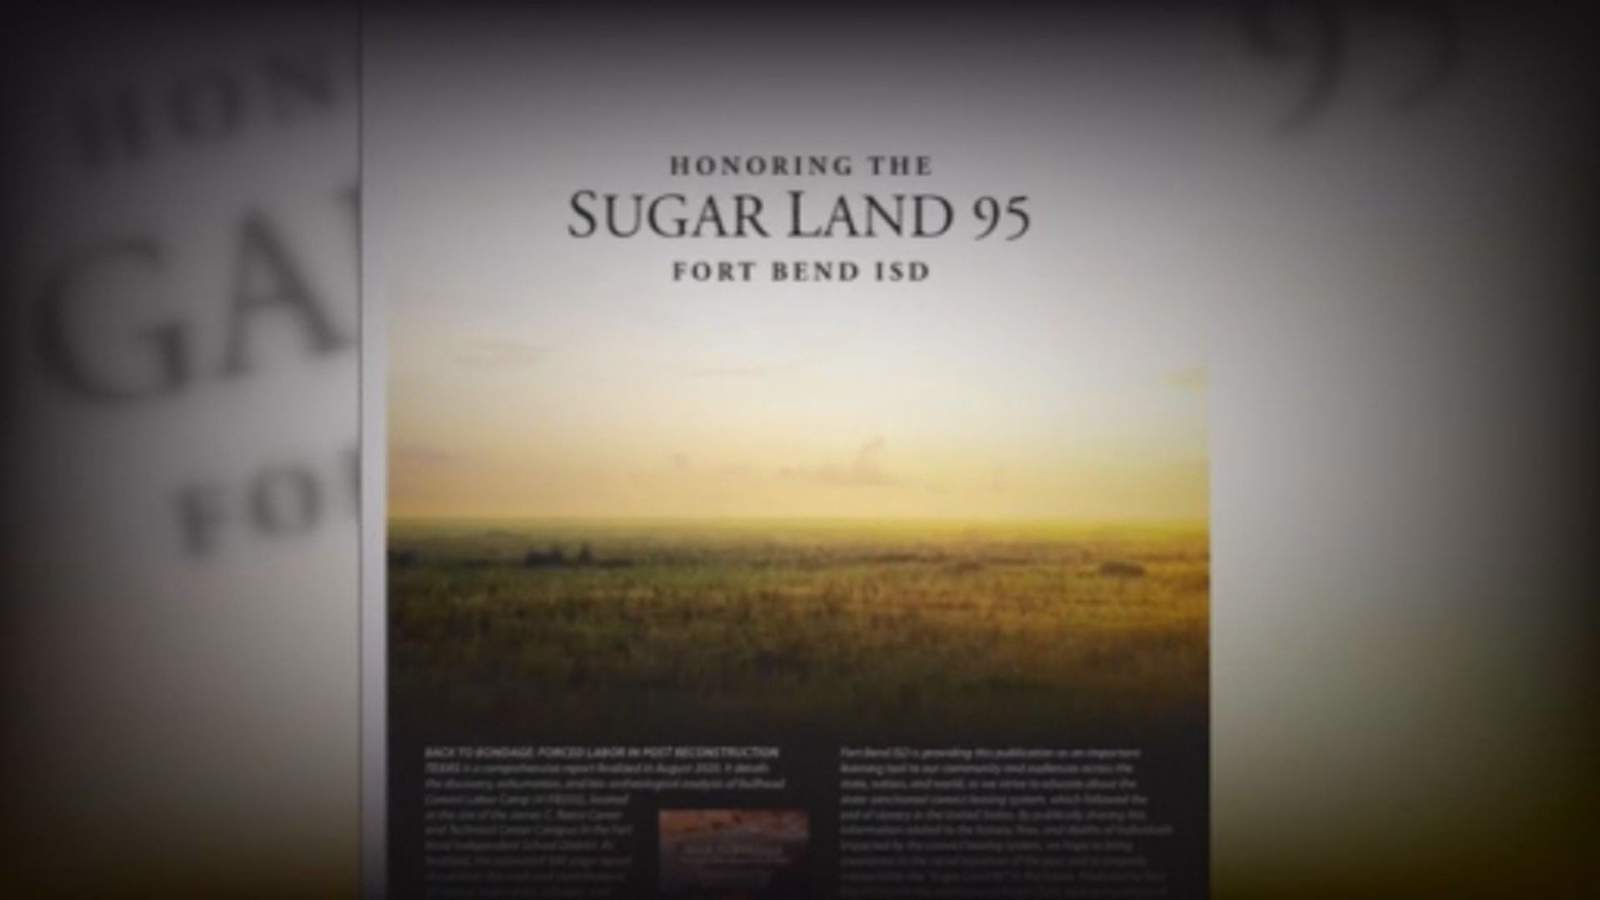 3 years after discovery of Sugar Land 95, debate on how best to tell their story continues